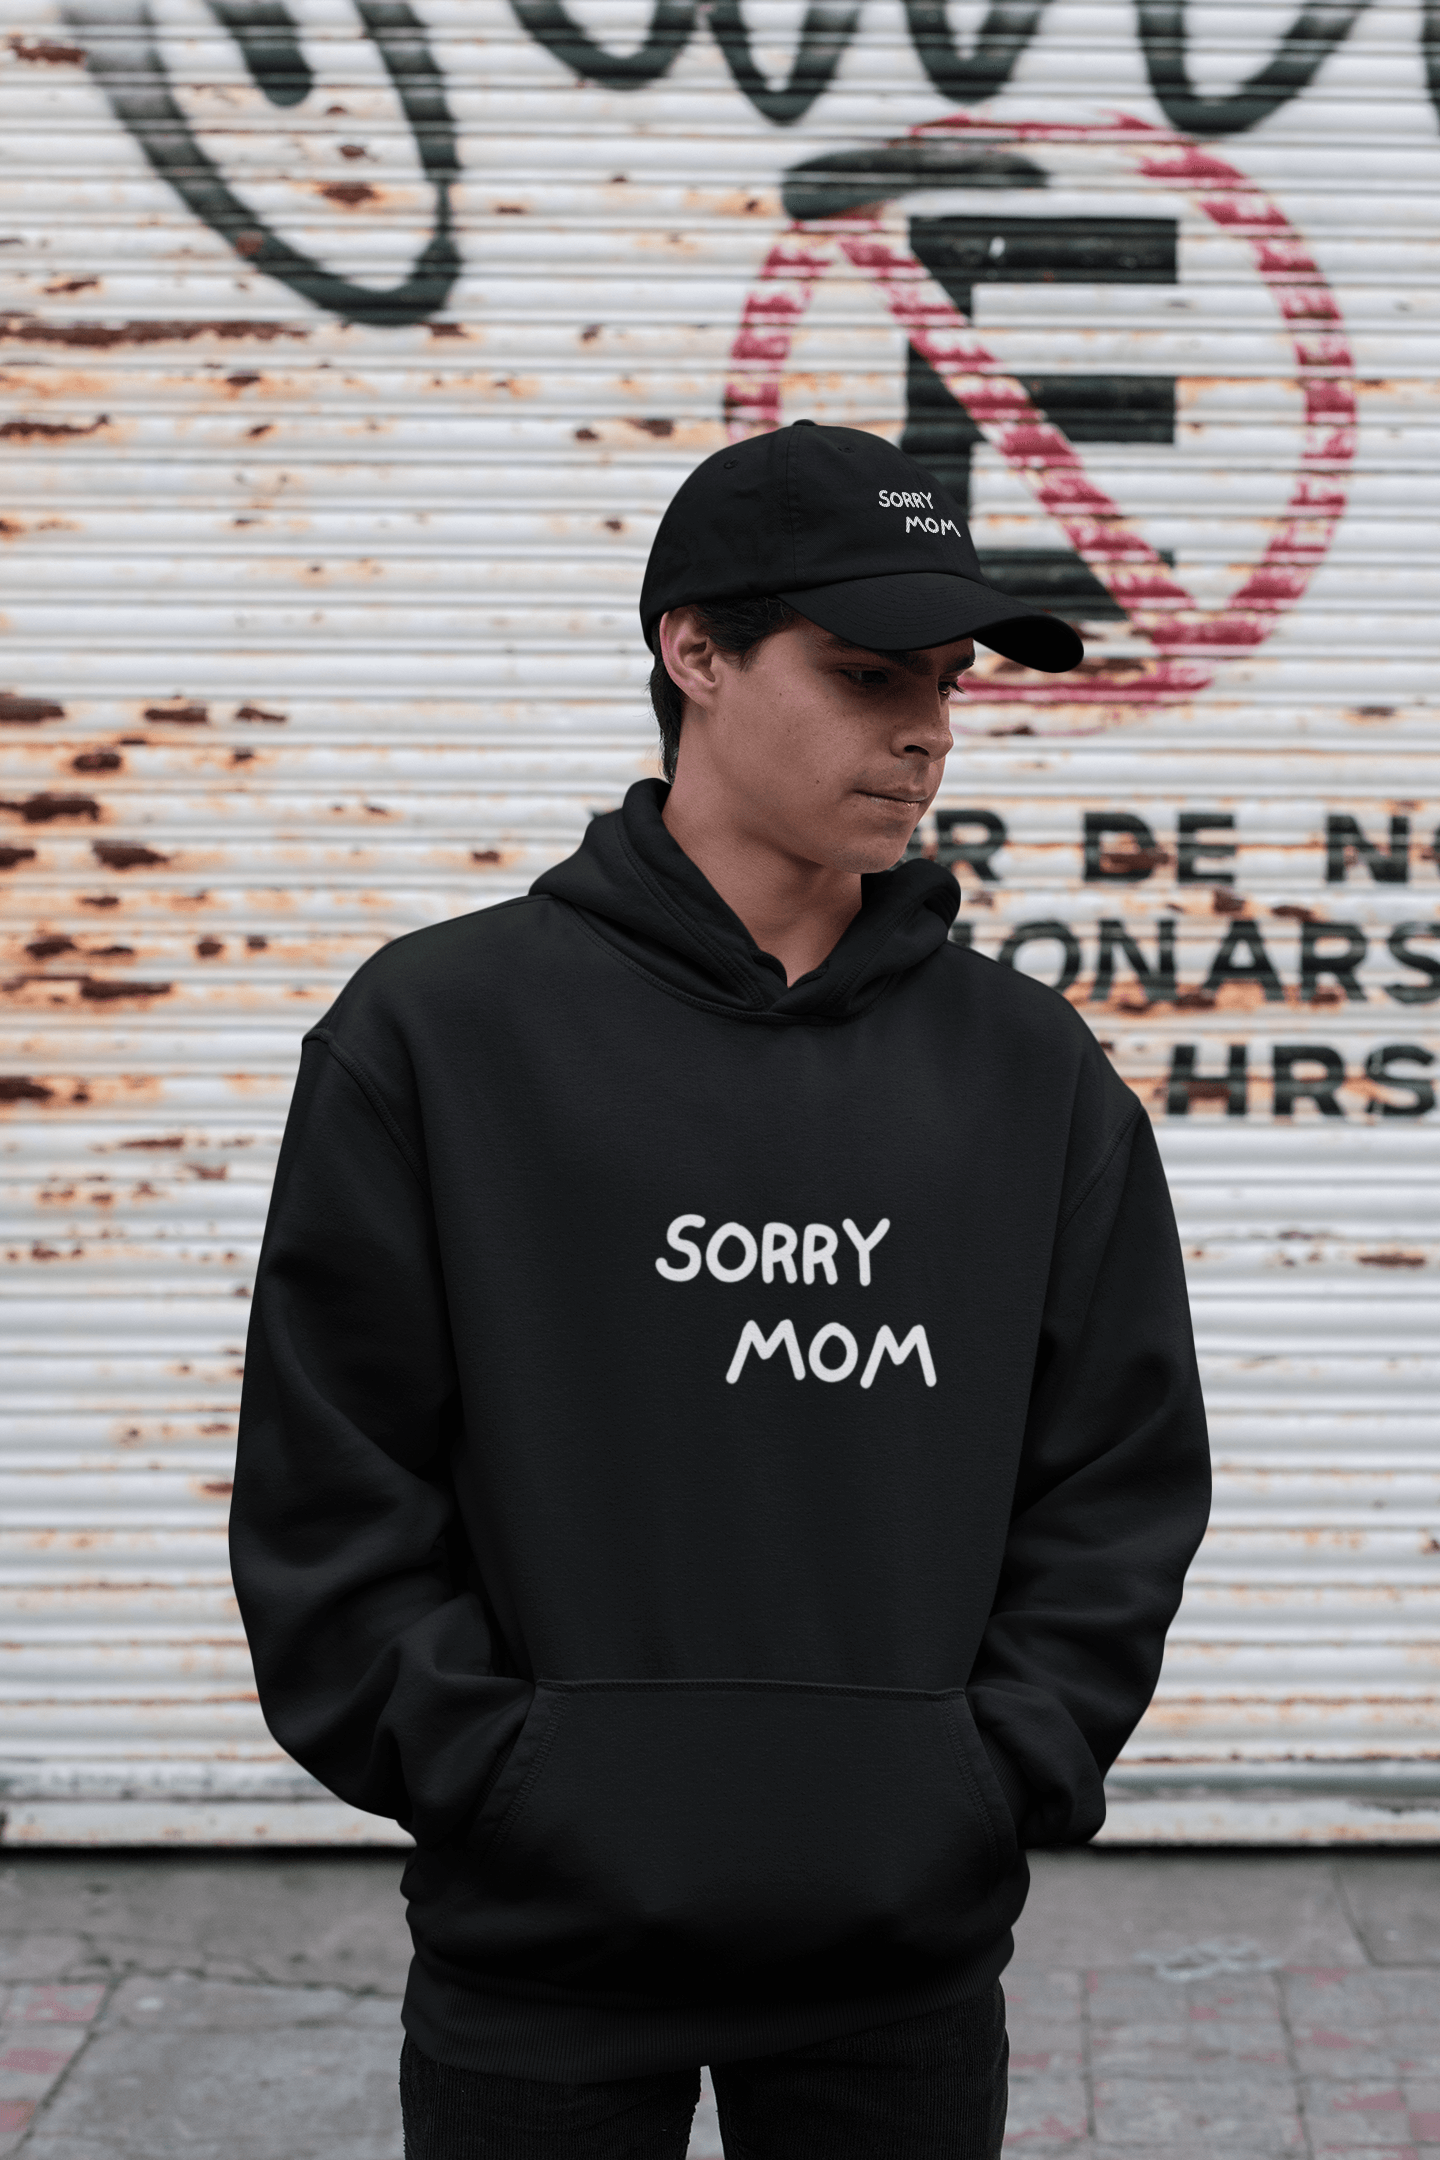 Sorry Mom Hat